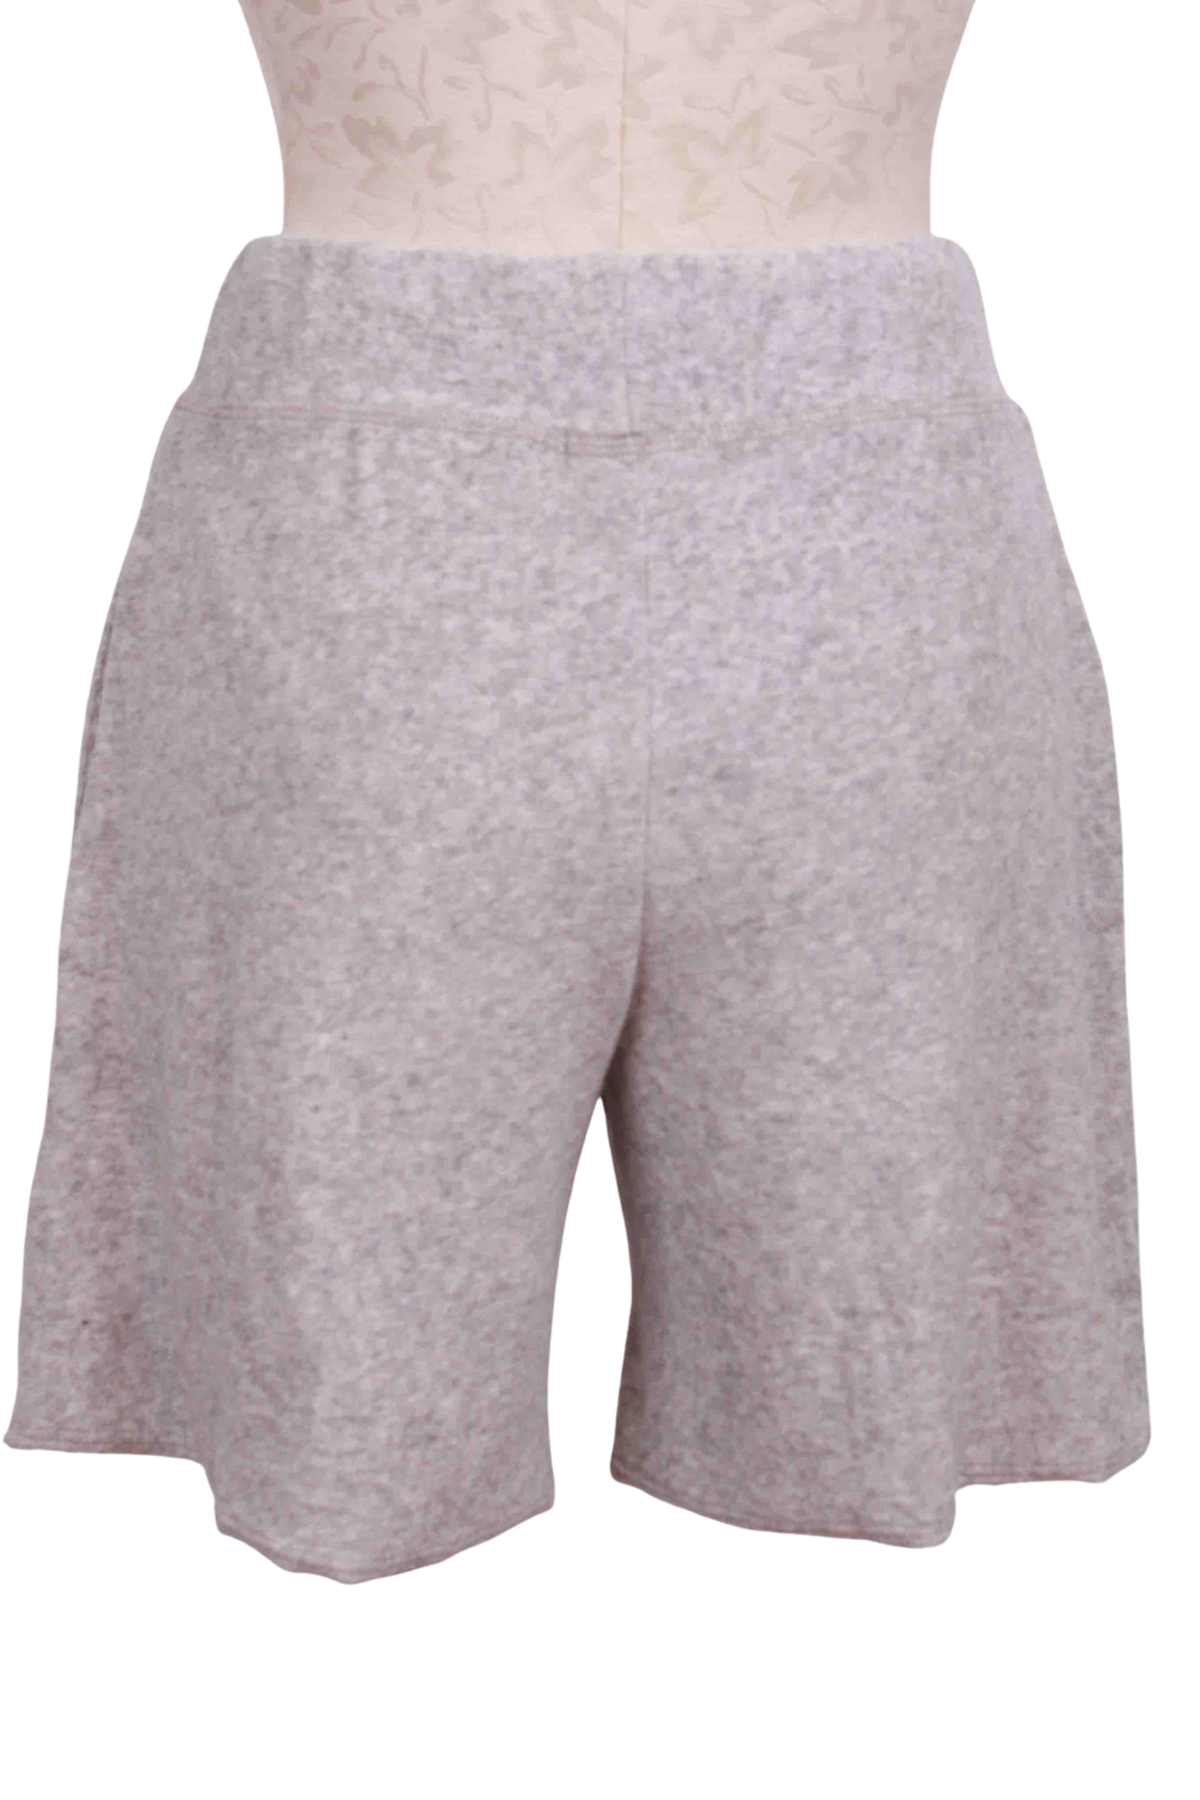 back view of Grey Heather Micro Terry Drawstring Short by Goldie Lewinter